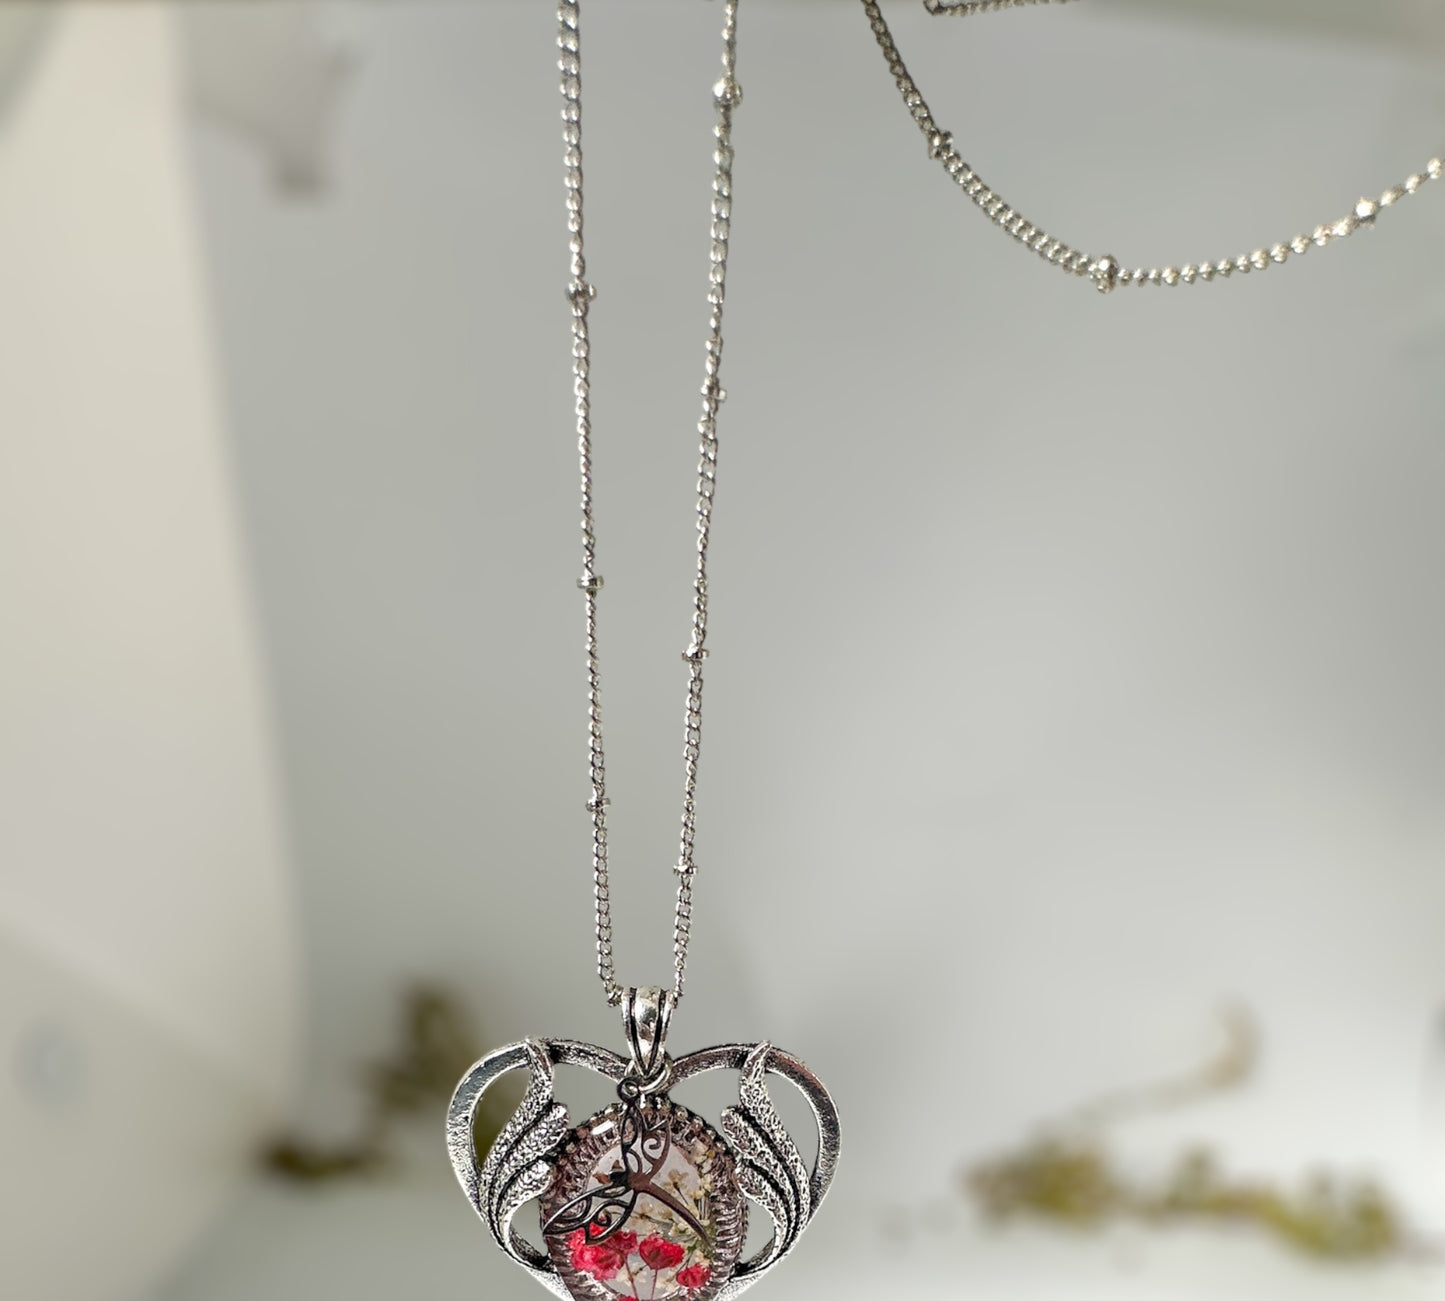 Red Heart Necklace - Dried Pressed Floral Heart Rose Necklace